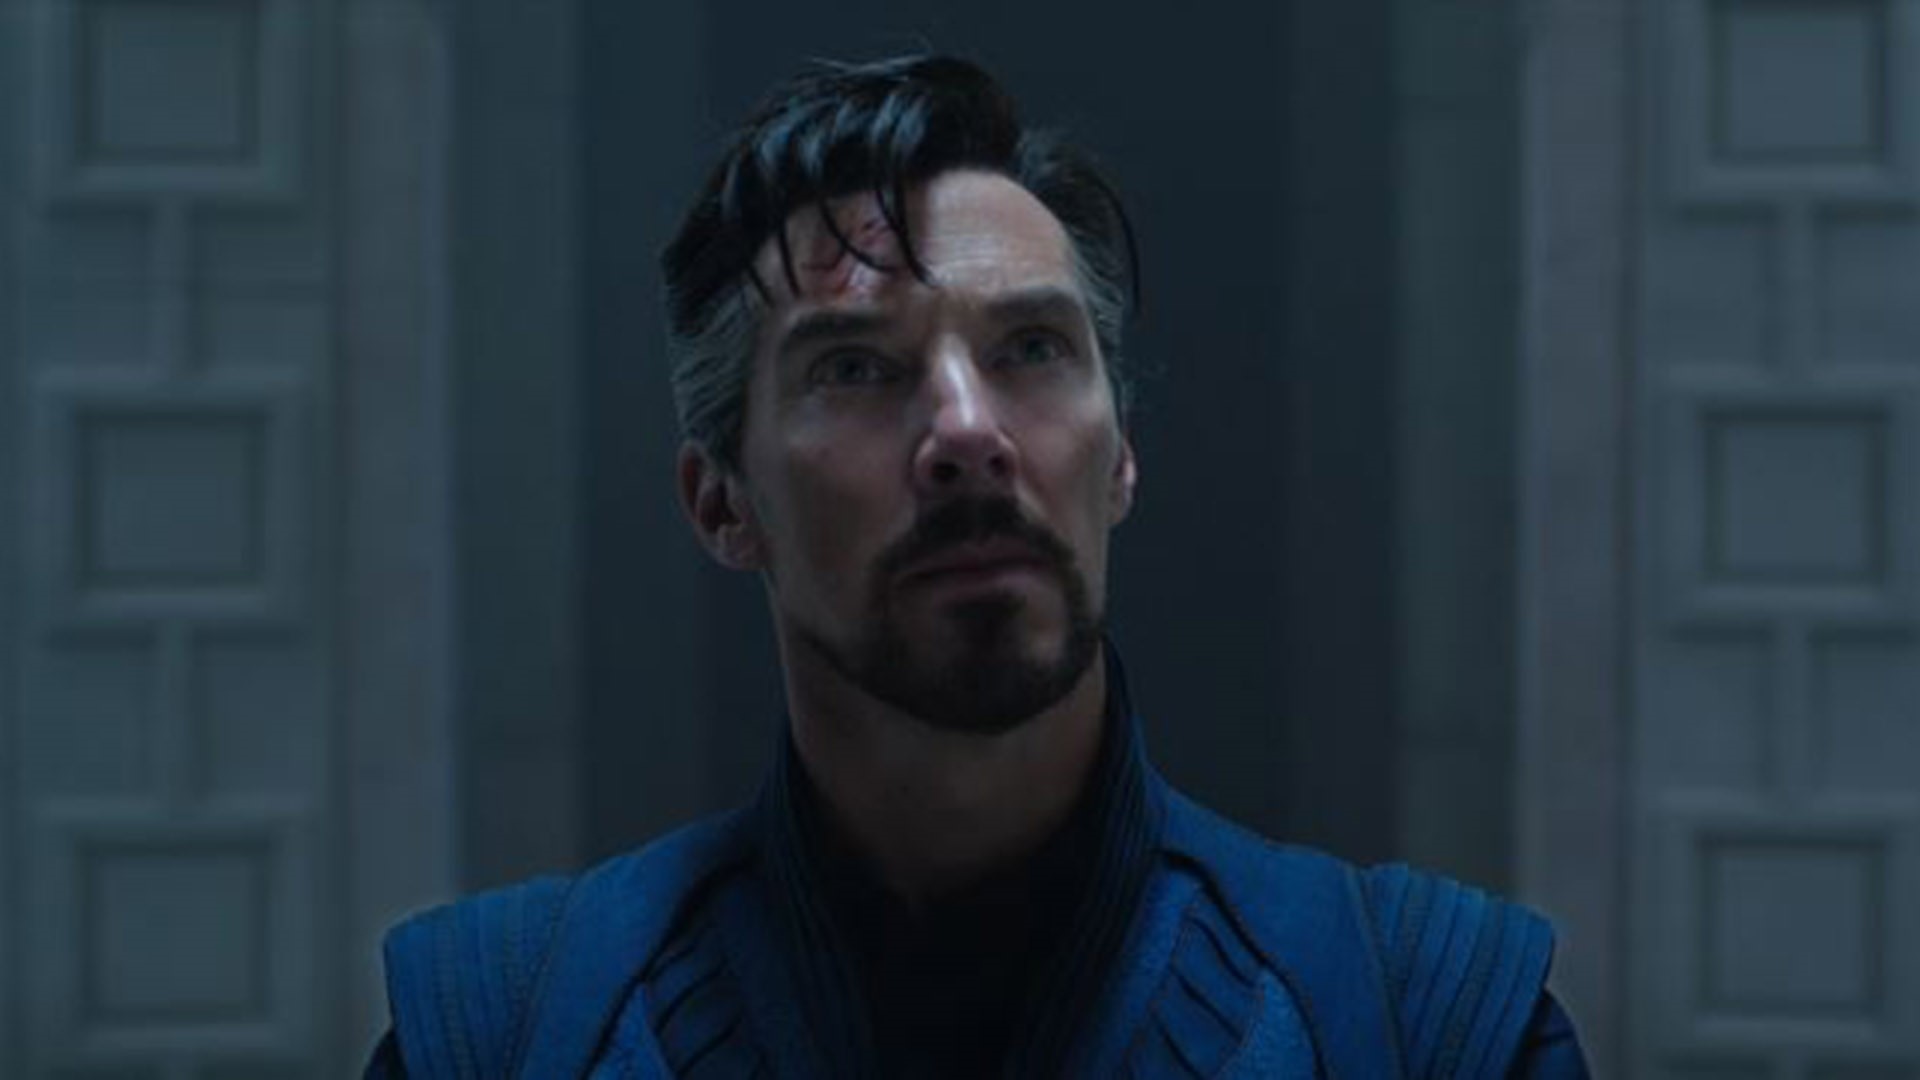 Trailer for the Marvel Studios movie "Doctor Strange in the Multiverse of Madness" starring Benedict Cumberbatch and Elizabeth Olsen.